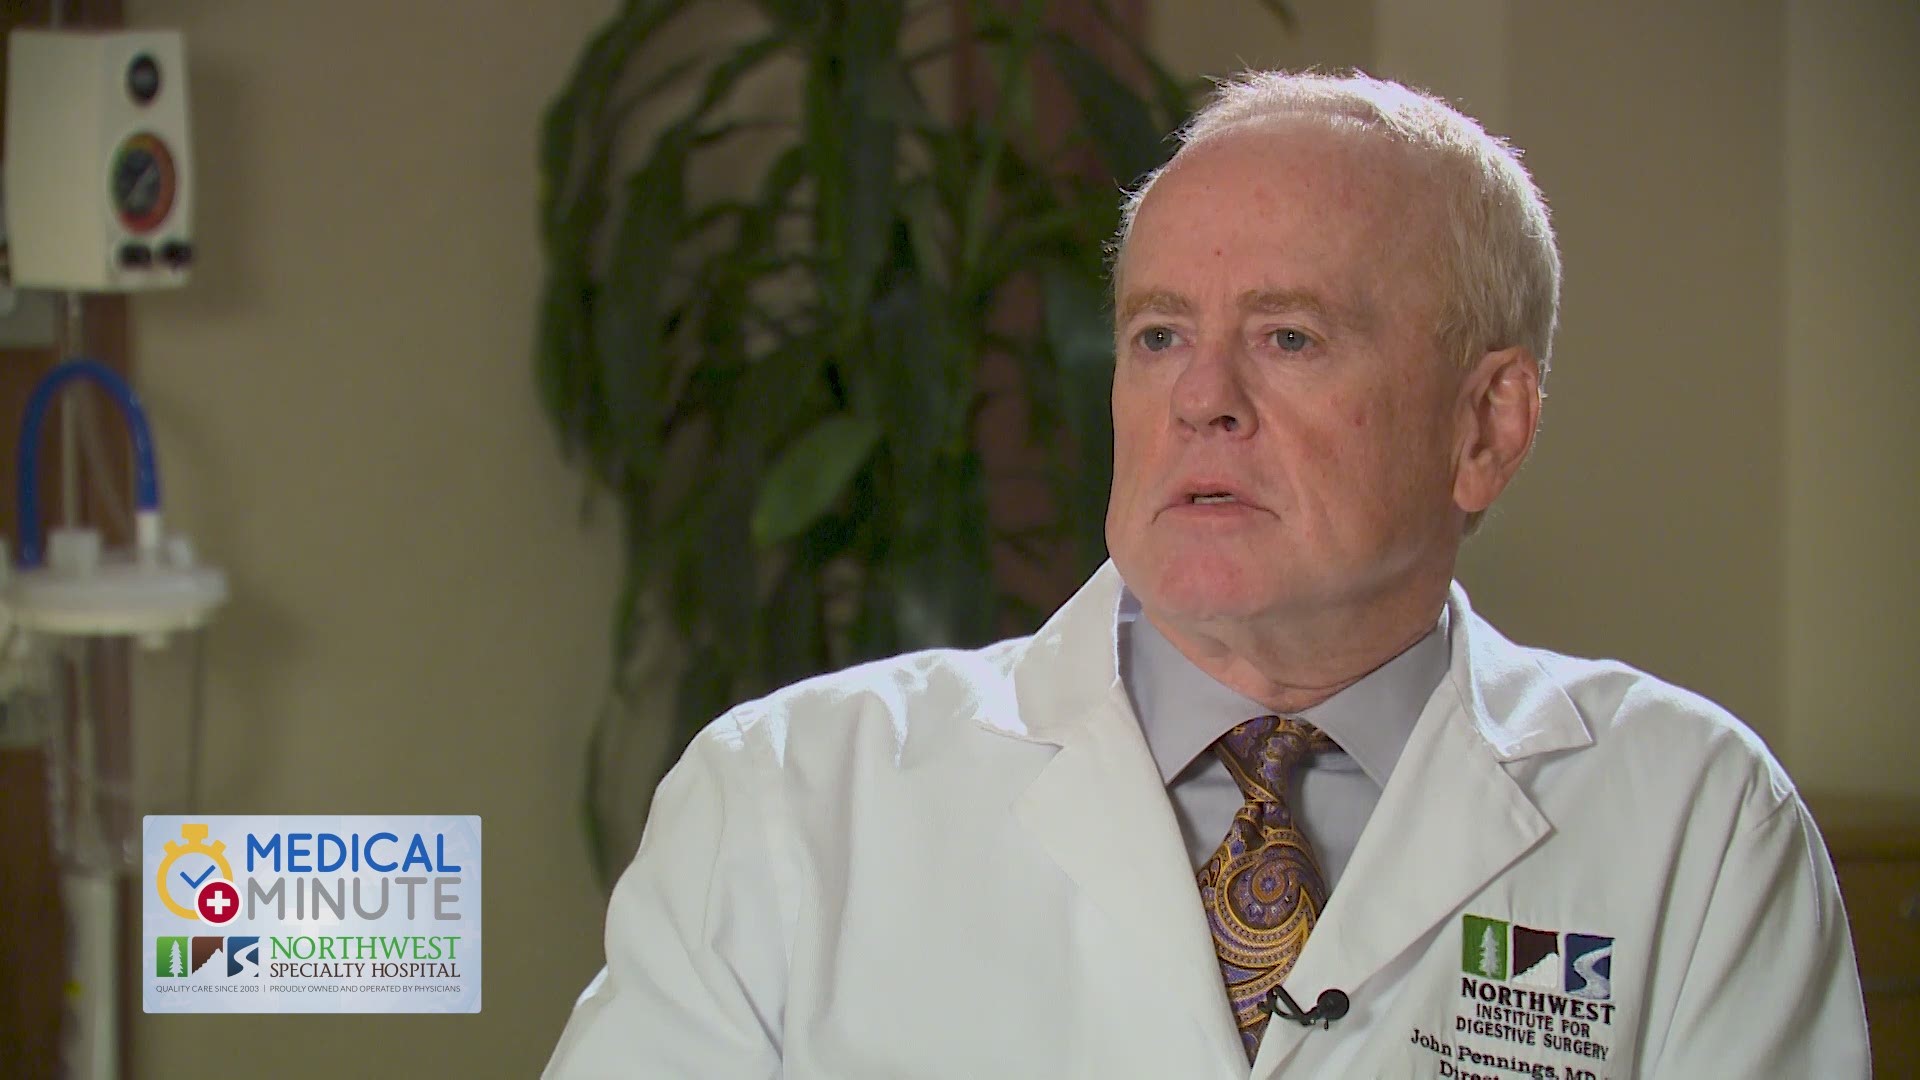 Northwest Specialty Hospital Medical Minute